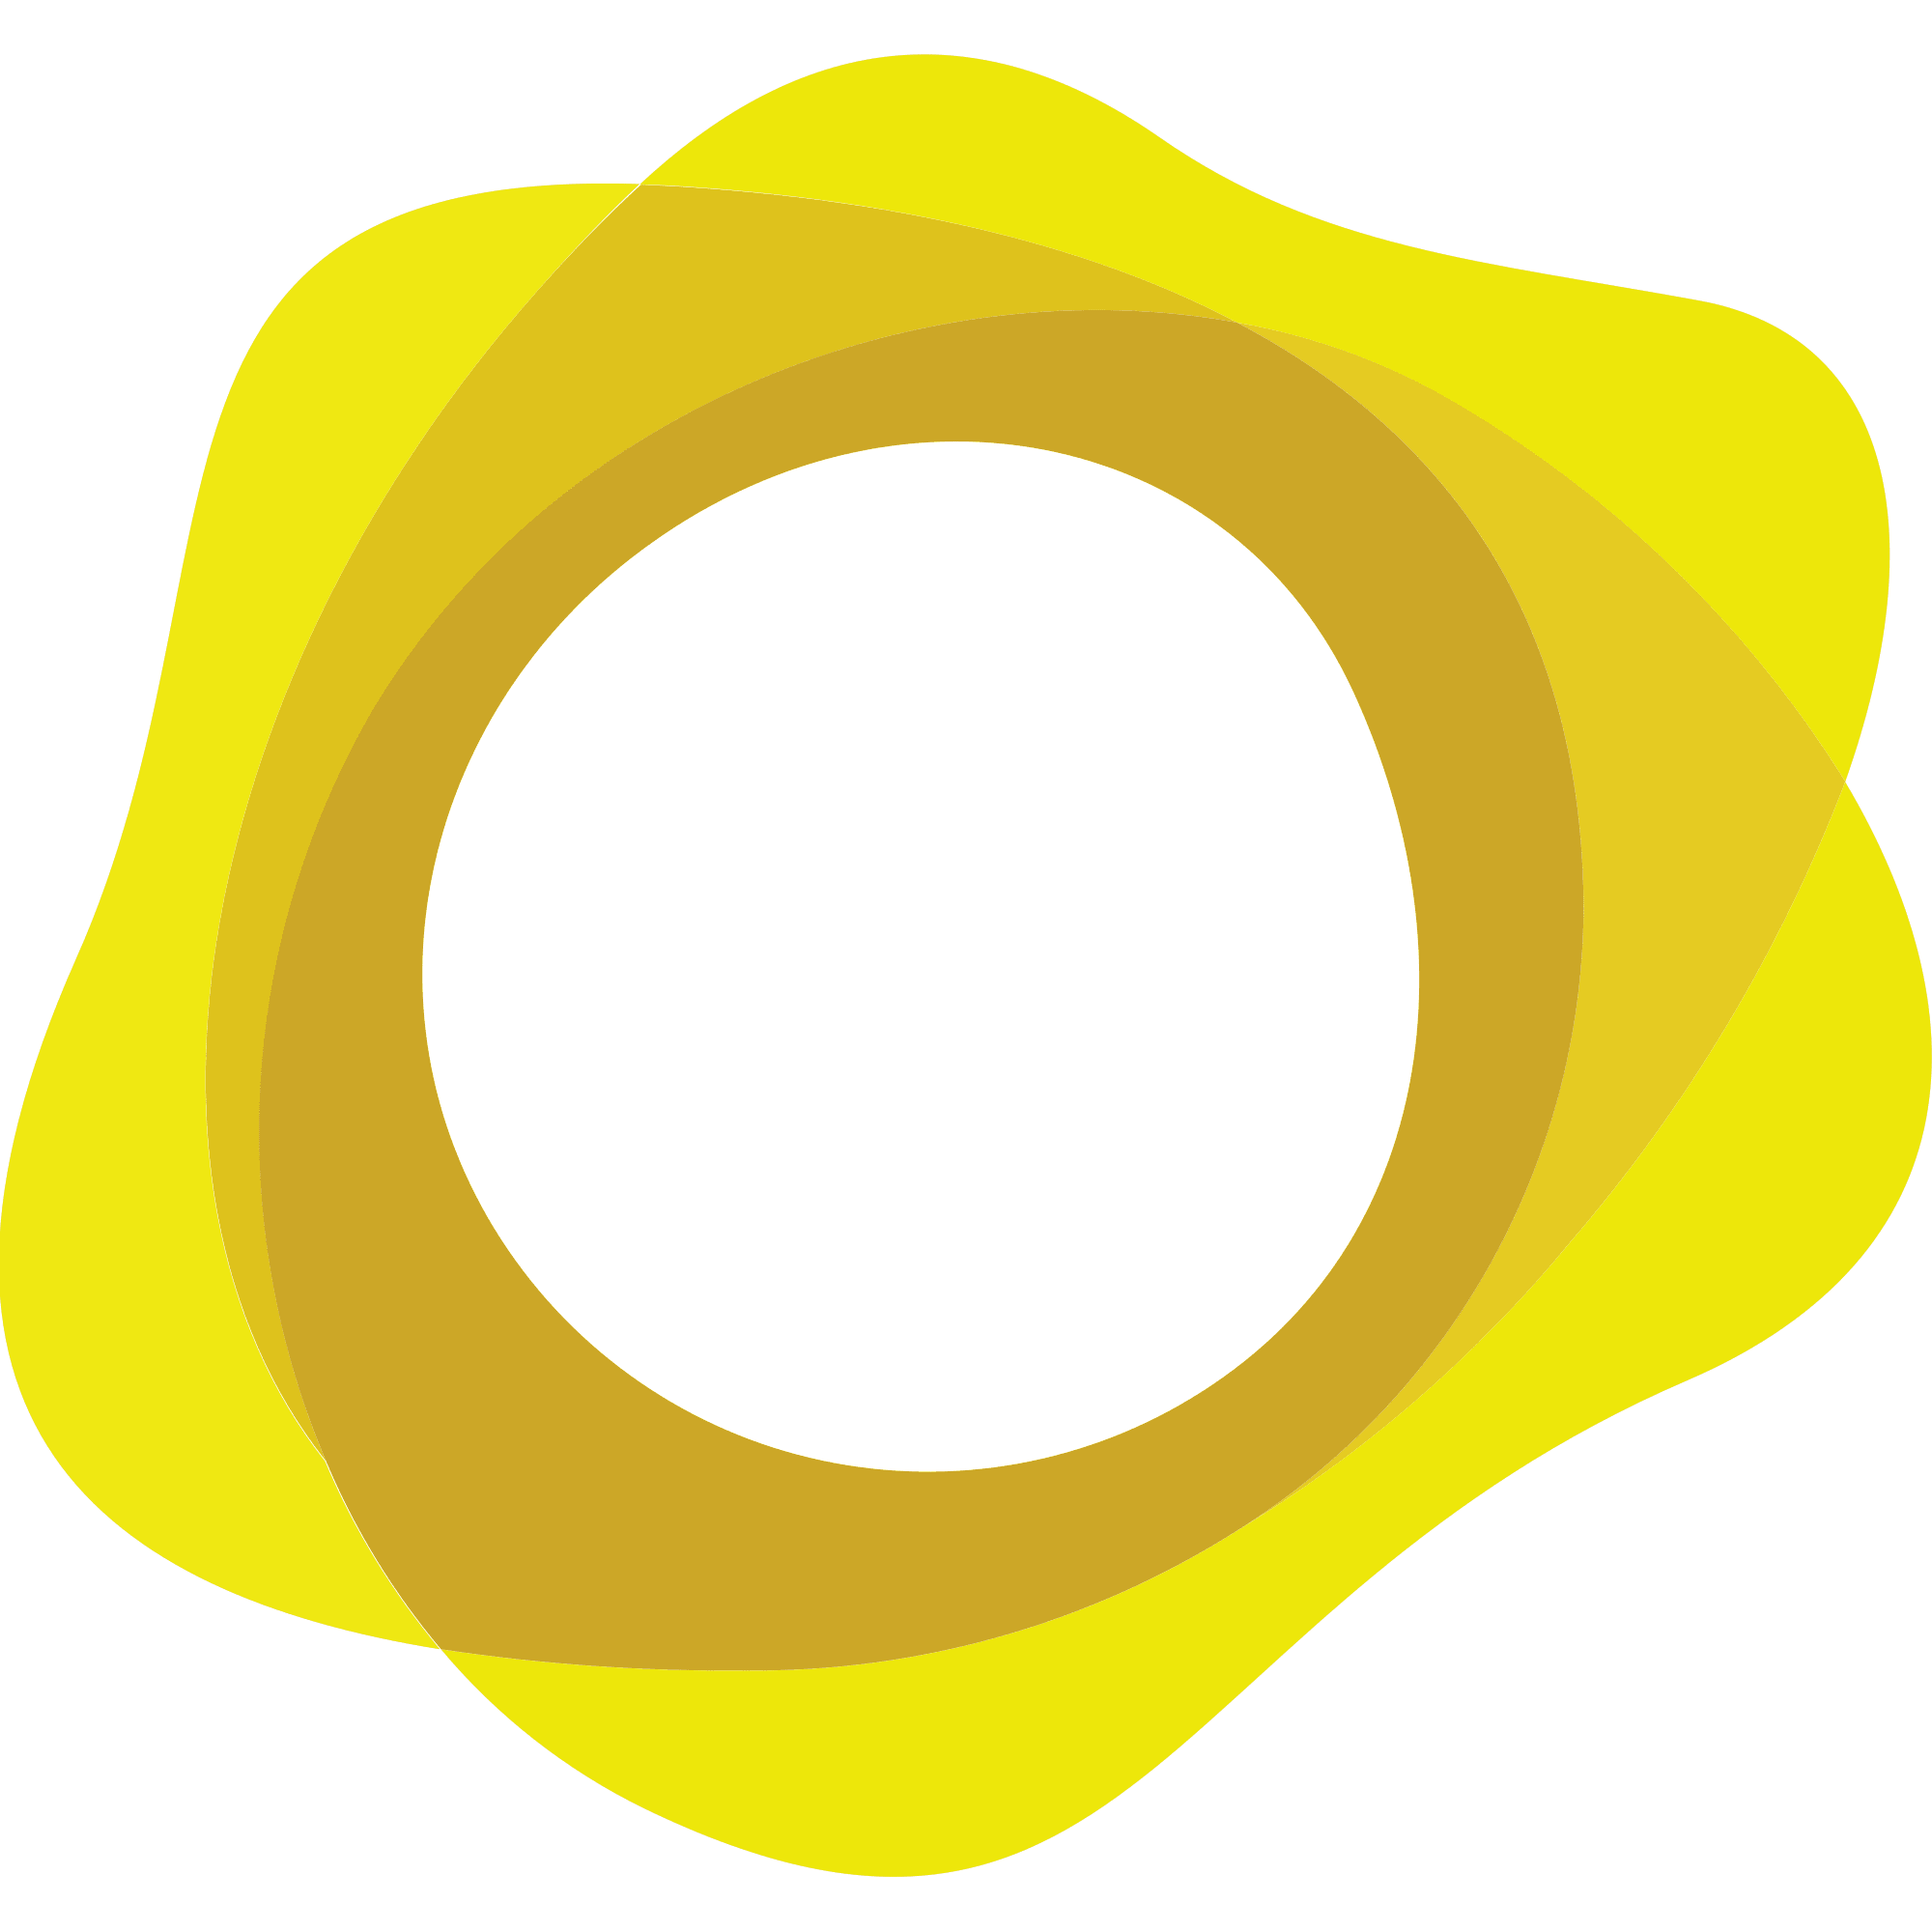 PAX Gold logo in png format